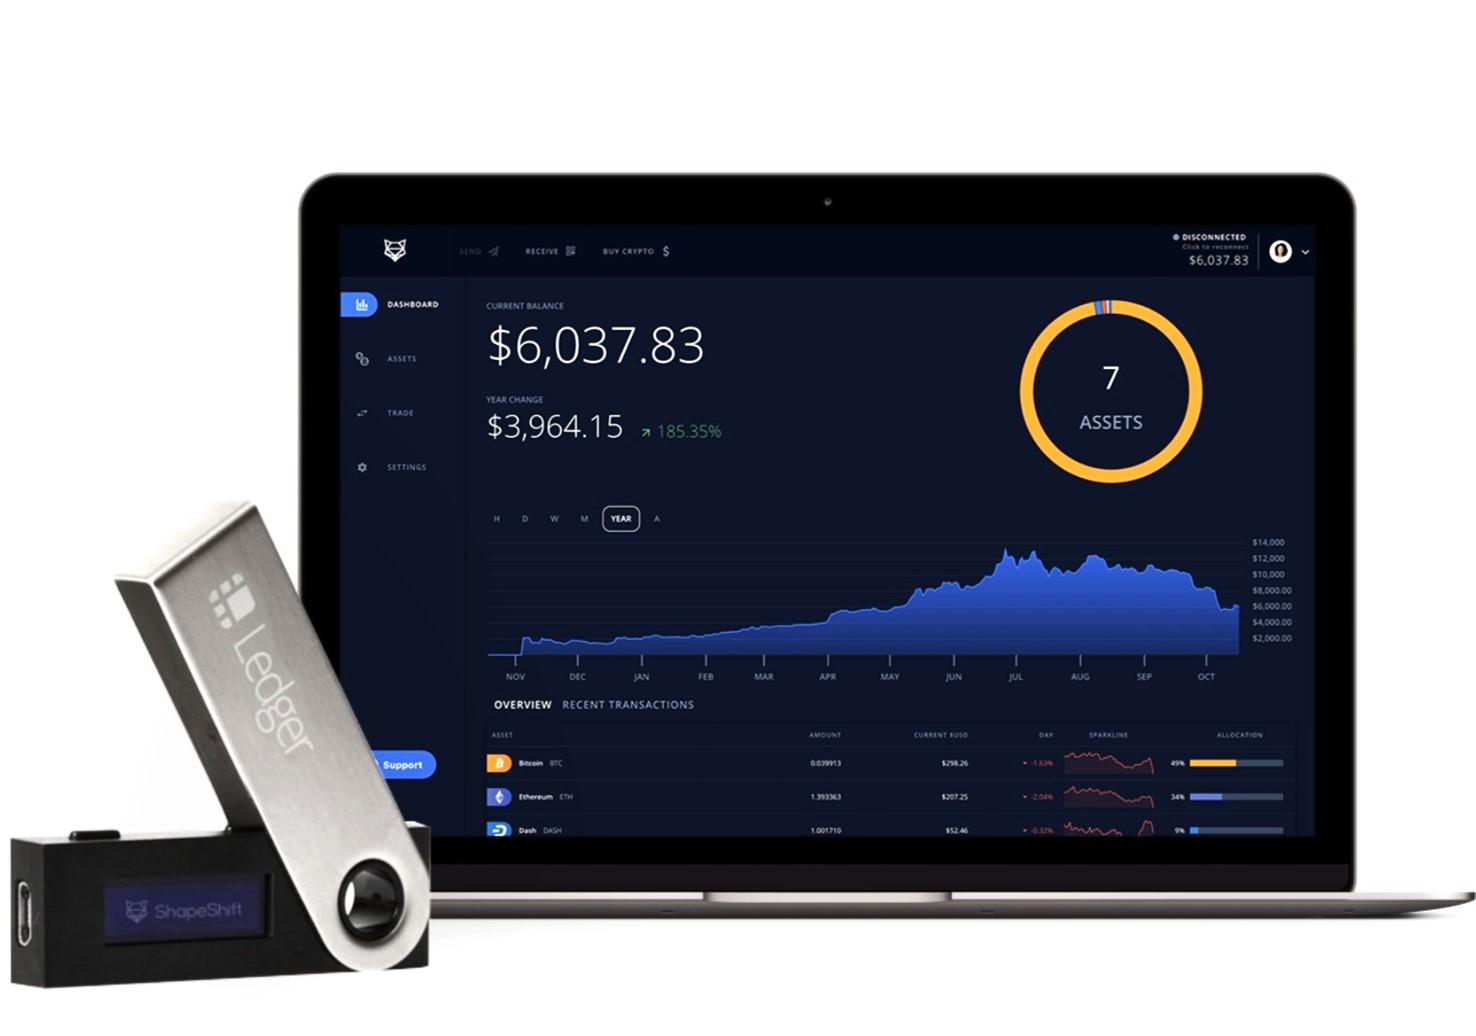 How To Use Shapeshift With Ledger Nano S